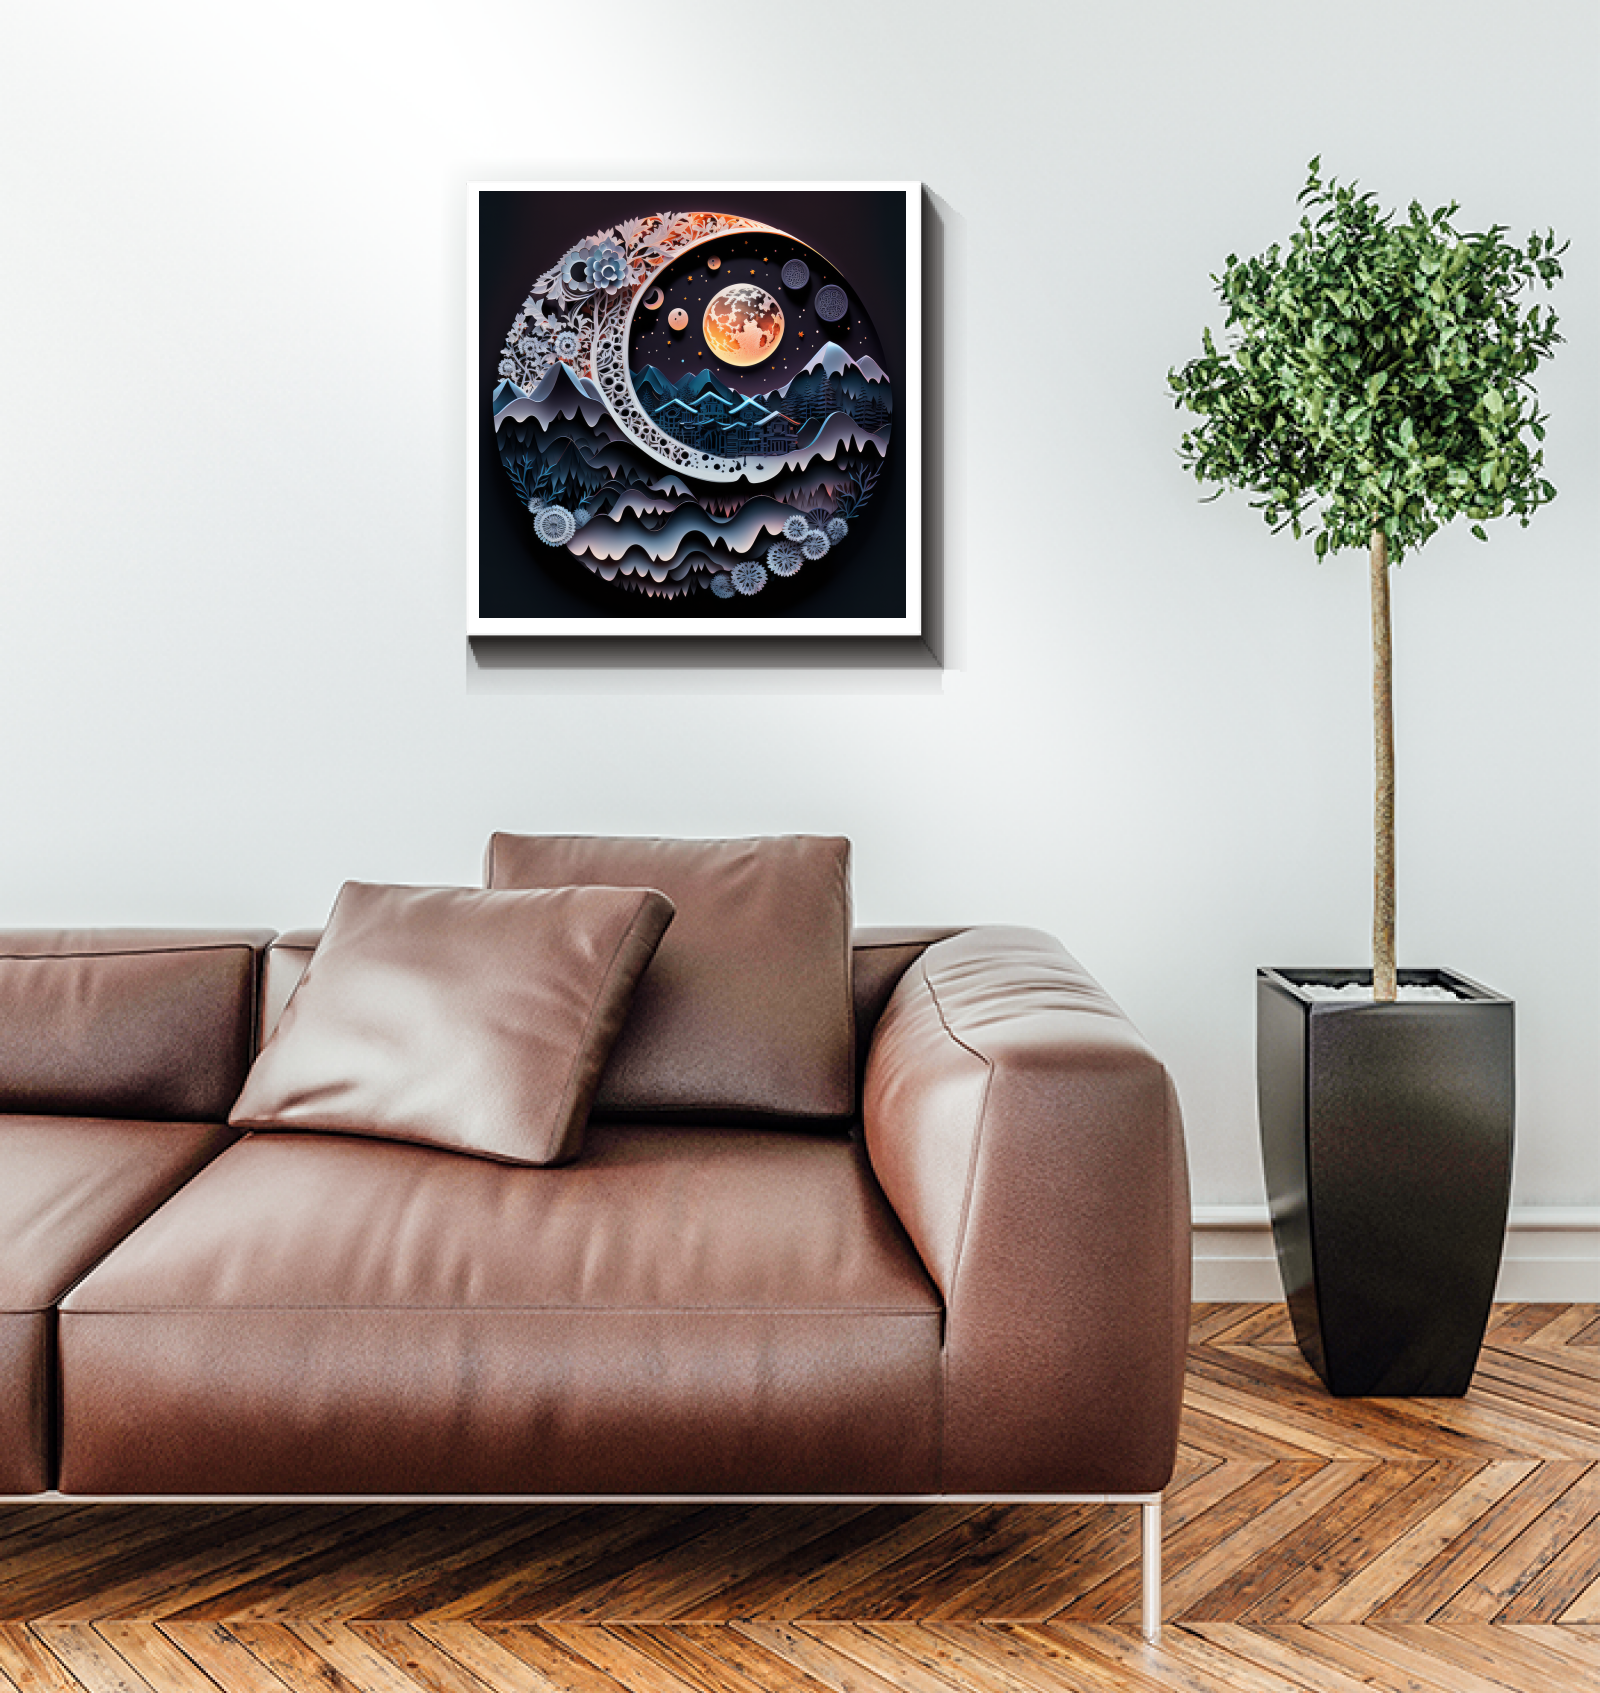 Dual-themed night and day artistic wrapped canvas.